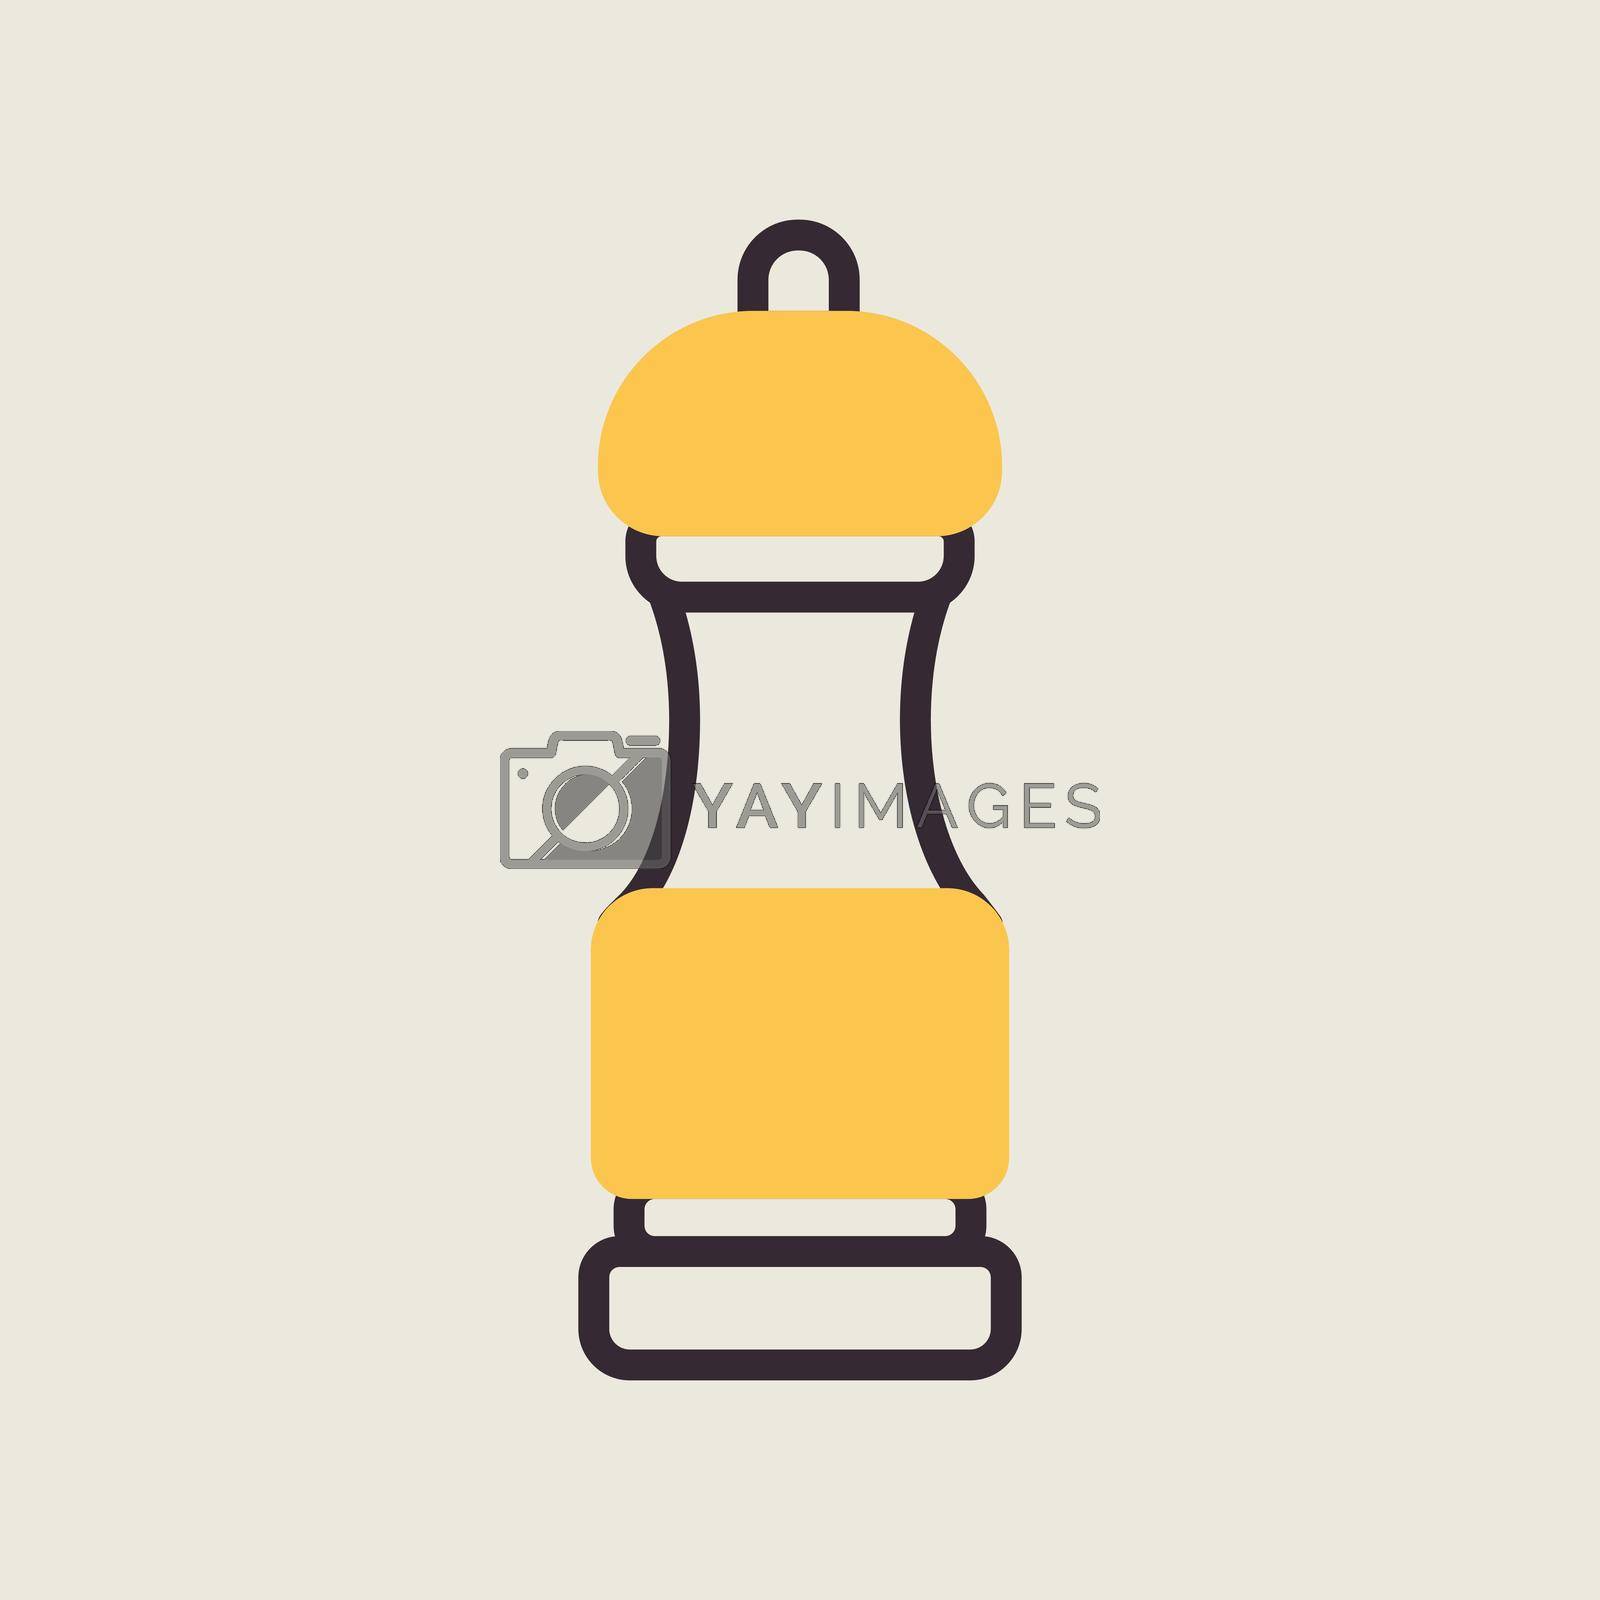 Royalty free image of Pepper mill spice grinder vector icon by nosik